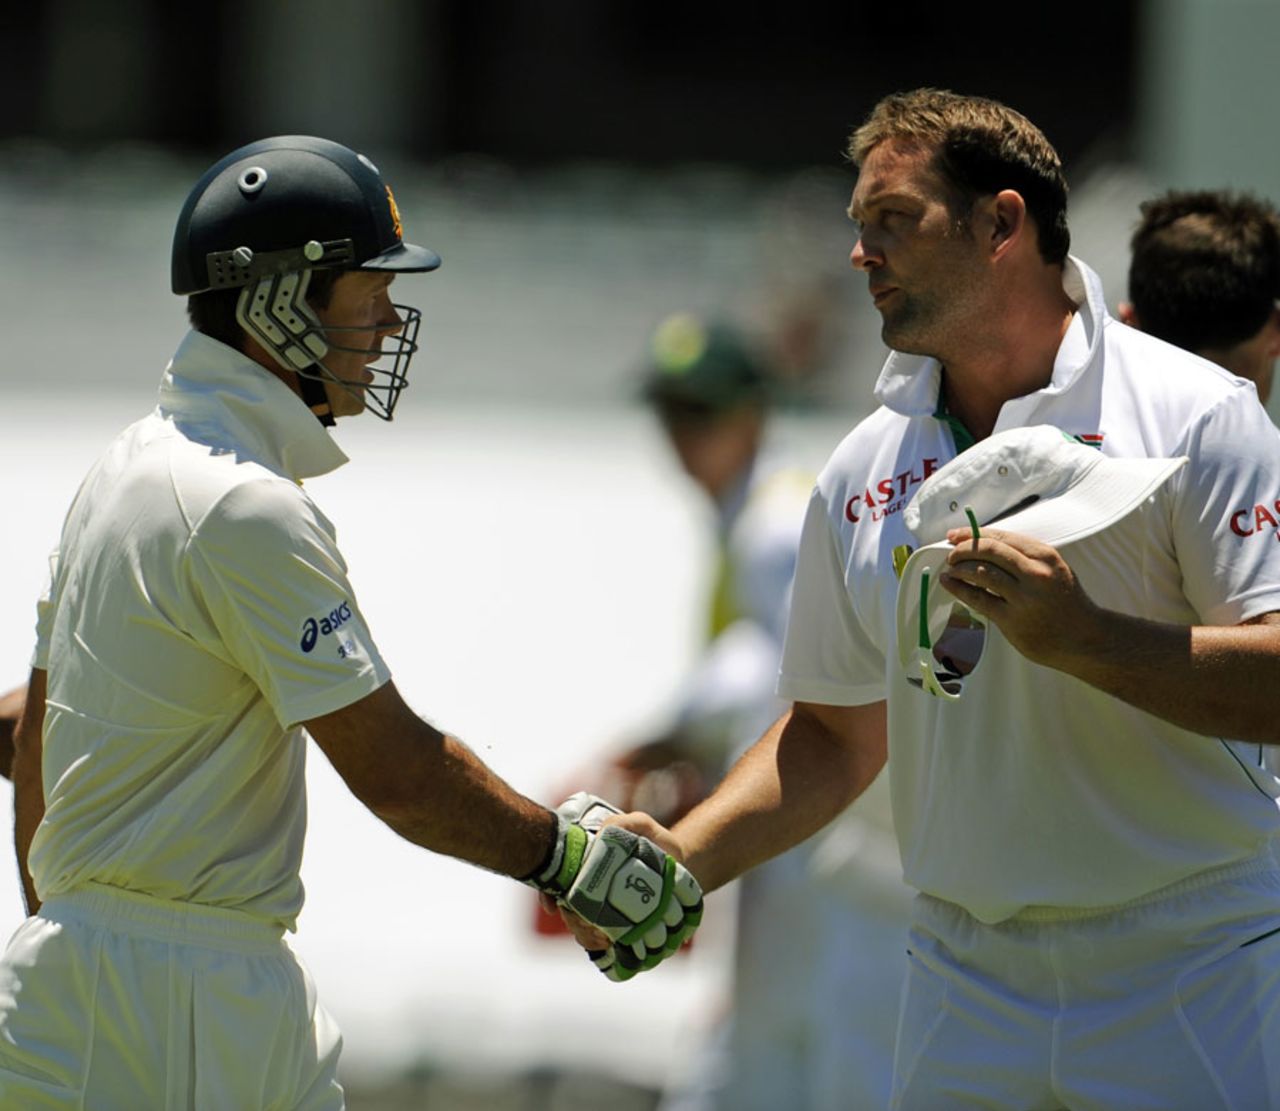 Jacques Kallis shakes hands with Ricky Ponting, Australia v South Africa, 3rd Test, Perth, 4th day, December 3, 2012